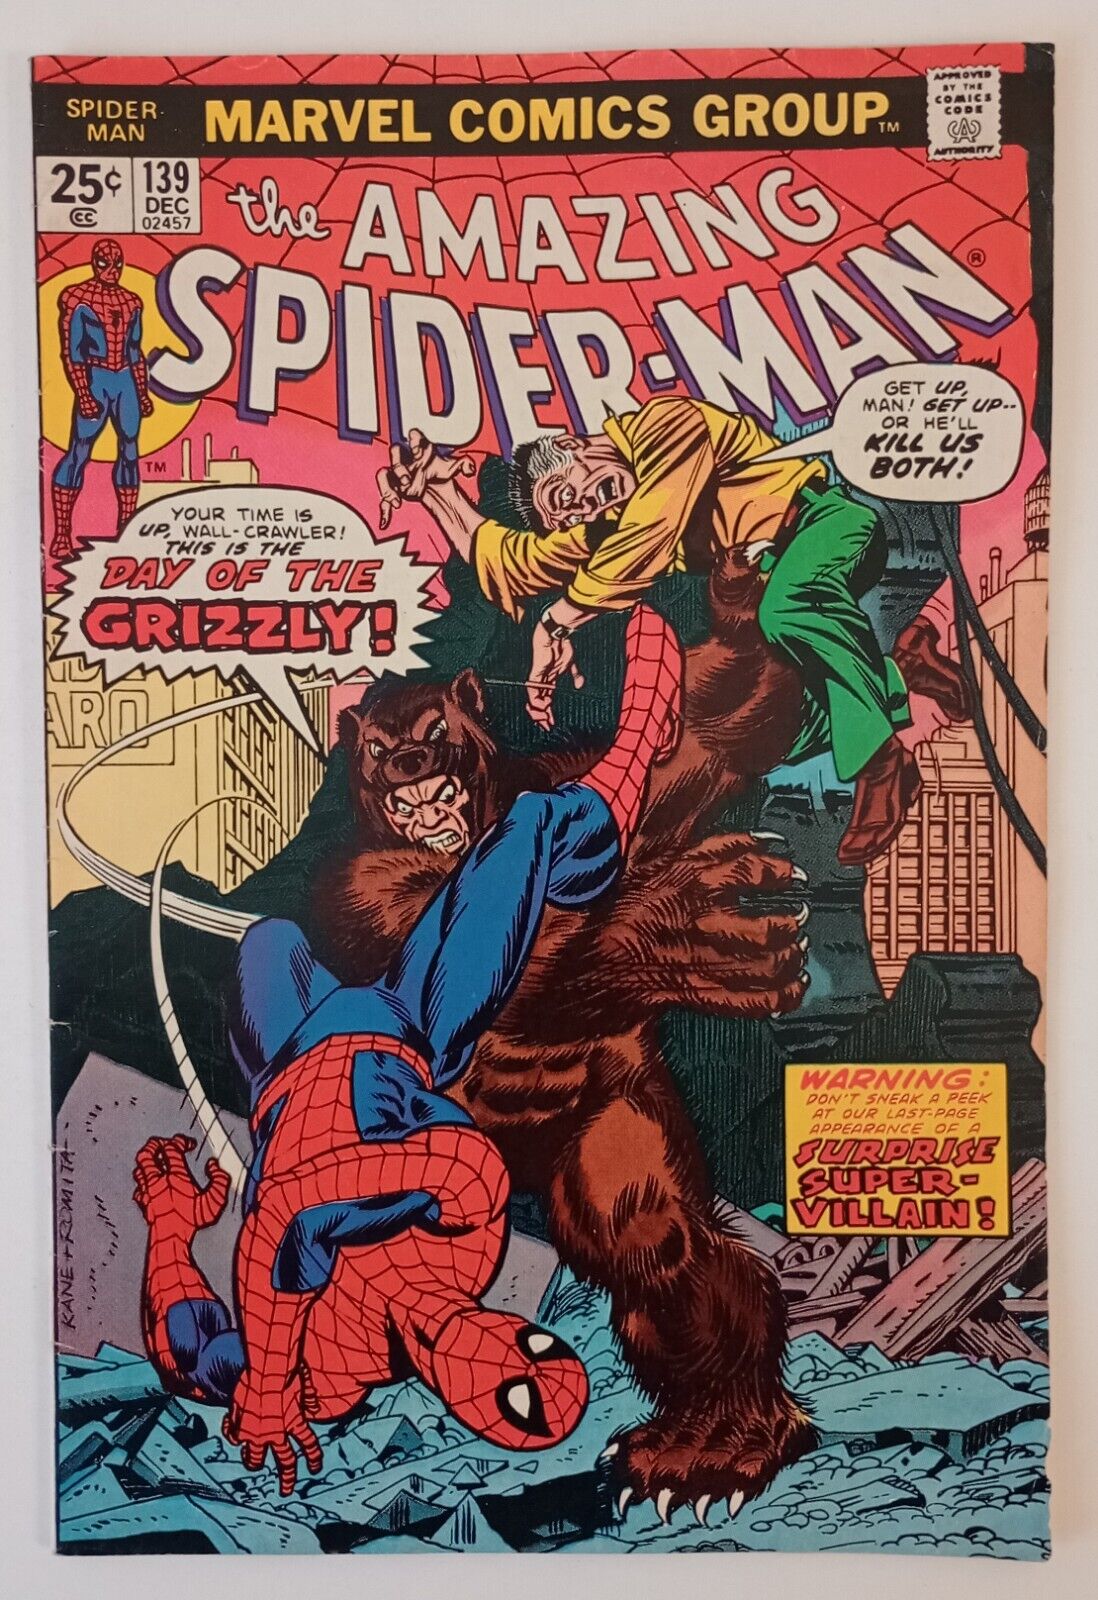 The Amazing Spider-Man #139 (1st app of The Grizzly) Bronze Age 1975 MVS Intact 